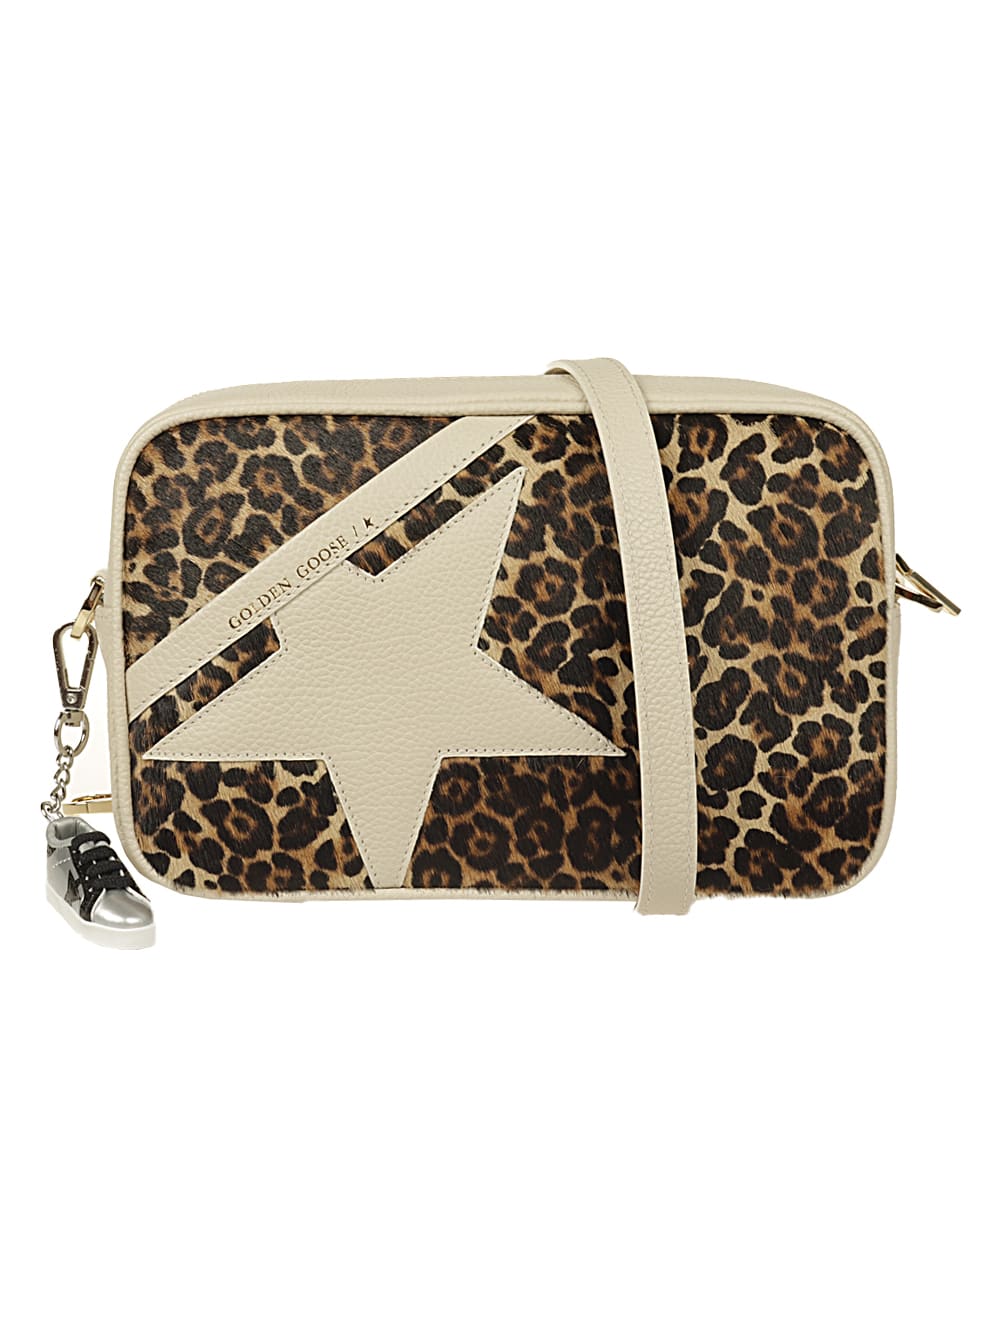 Golden Goose Star Bag Pony Leo Front Panel Leather Star And Sho